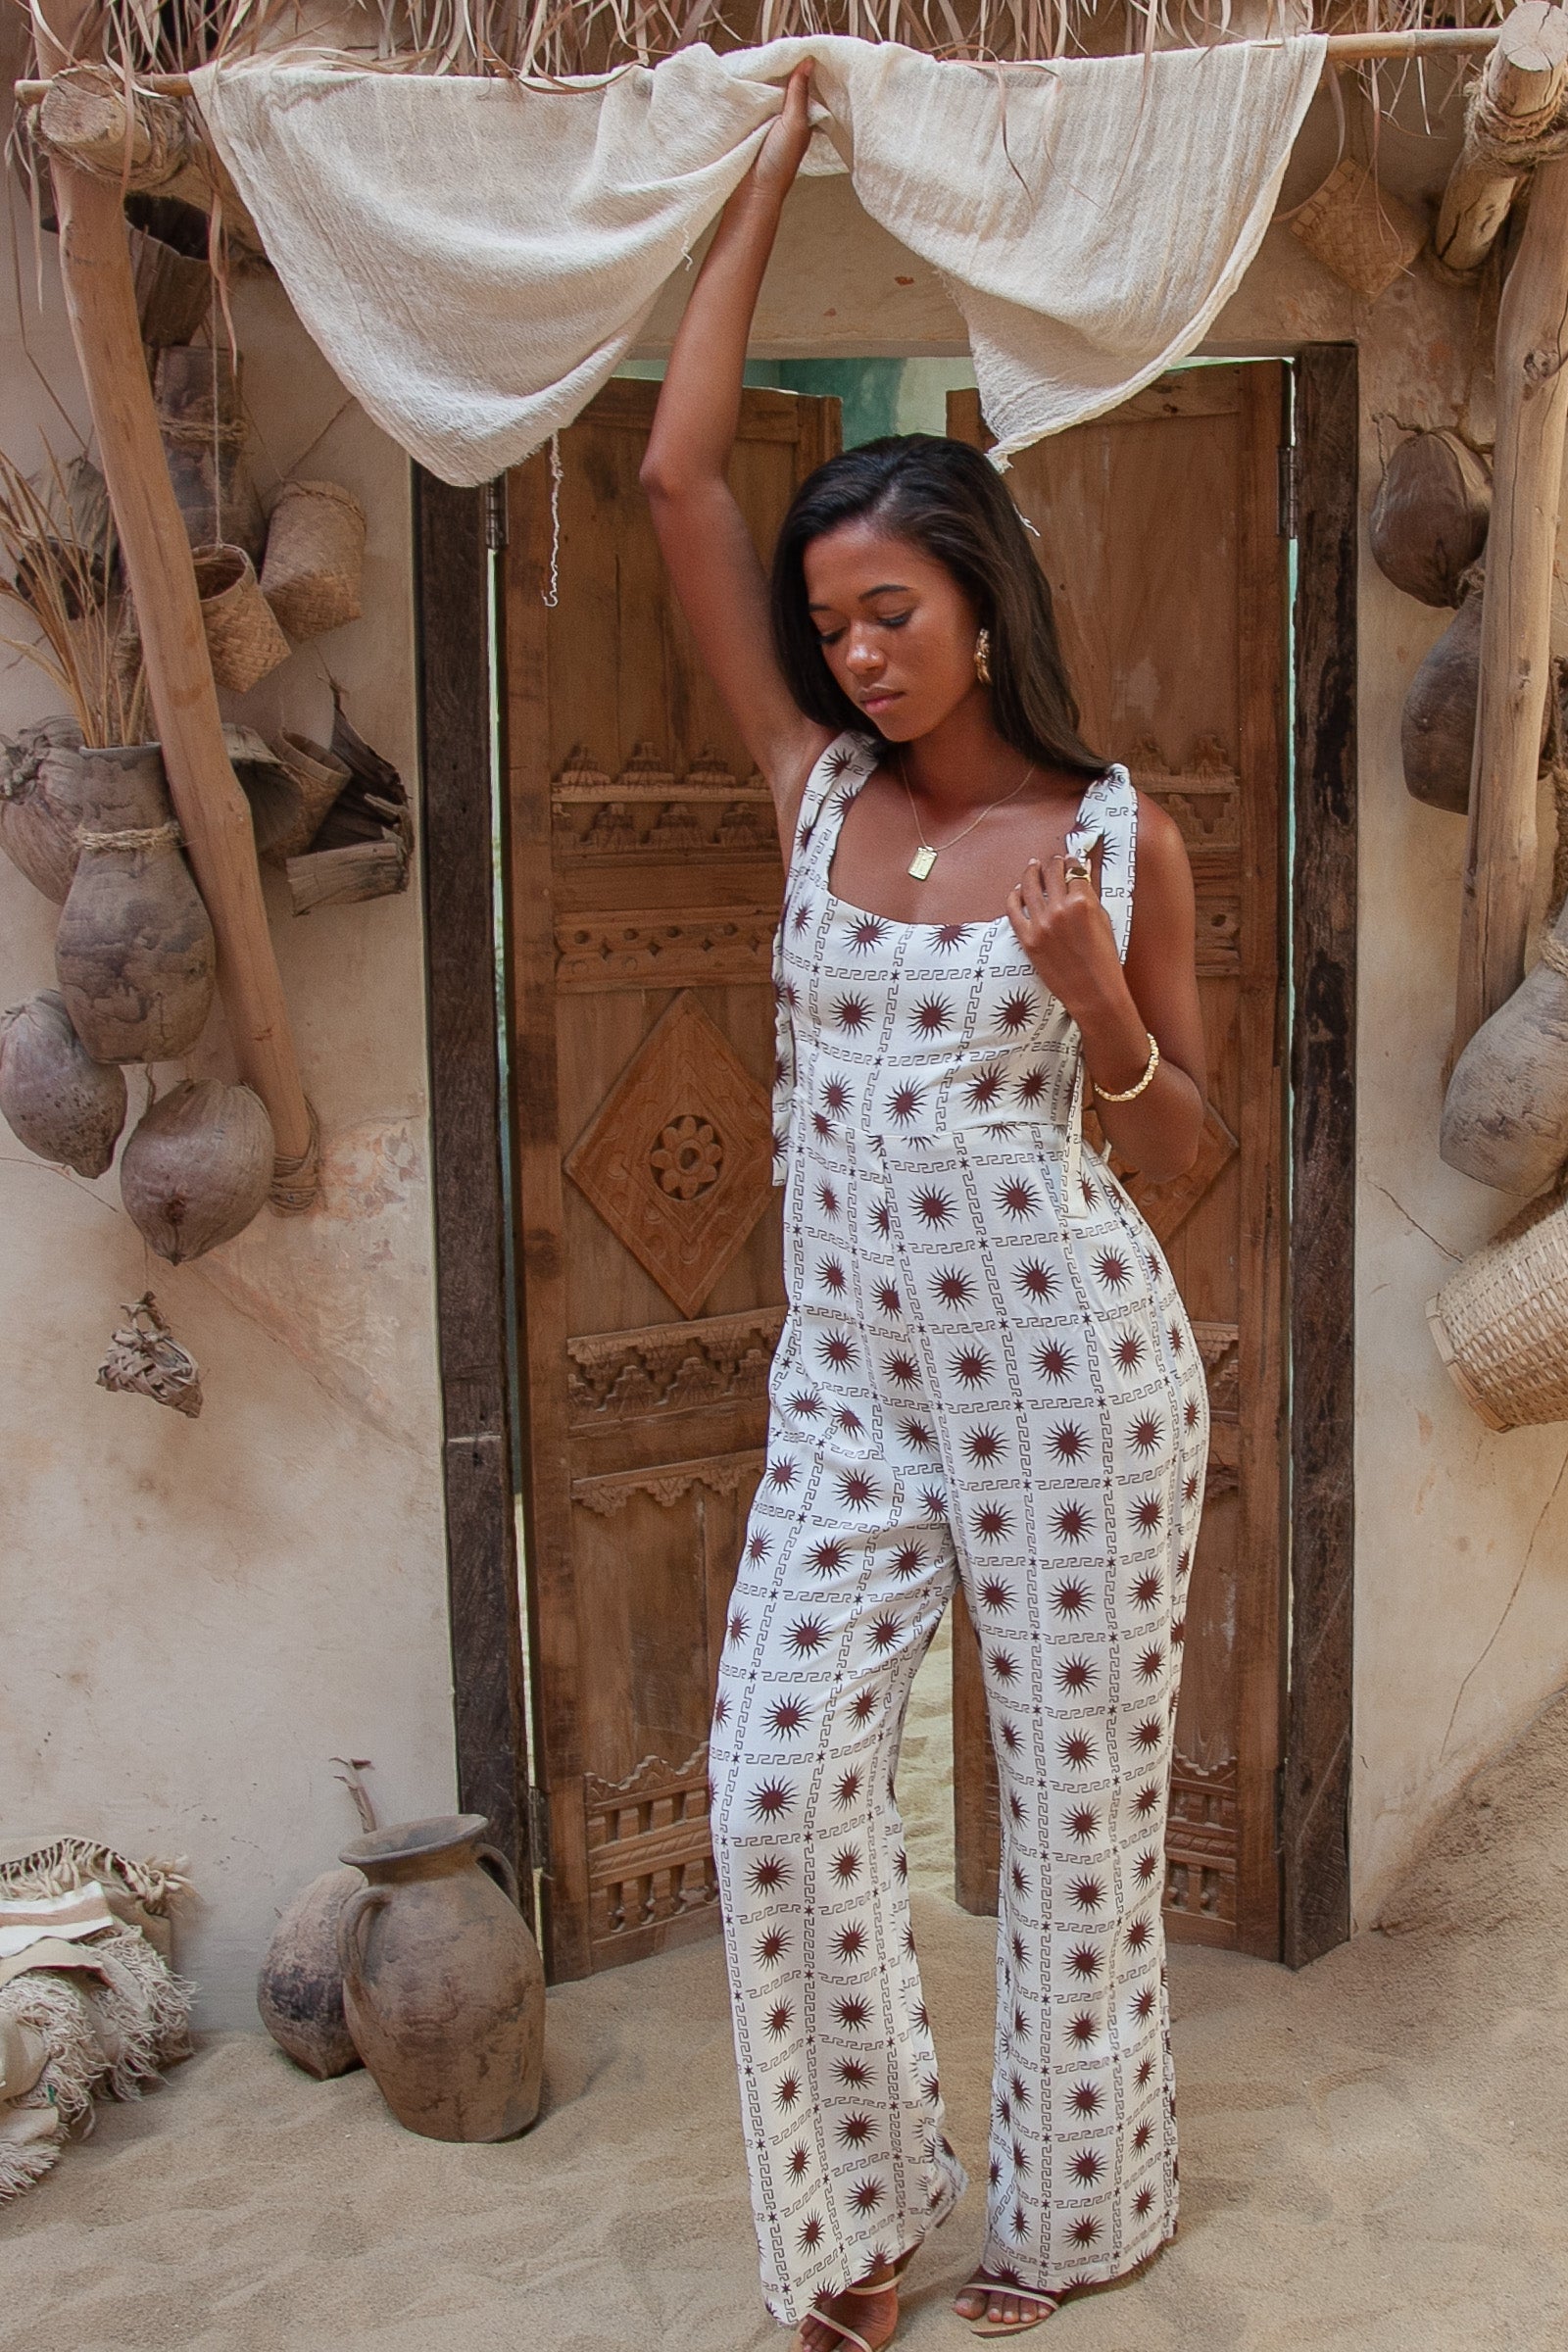 Tuscan Bonnie Jumpsuit Brown and Cream Printed Jumpsuit